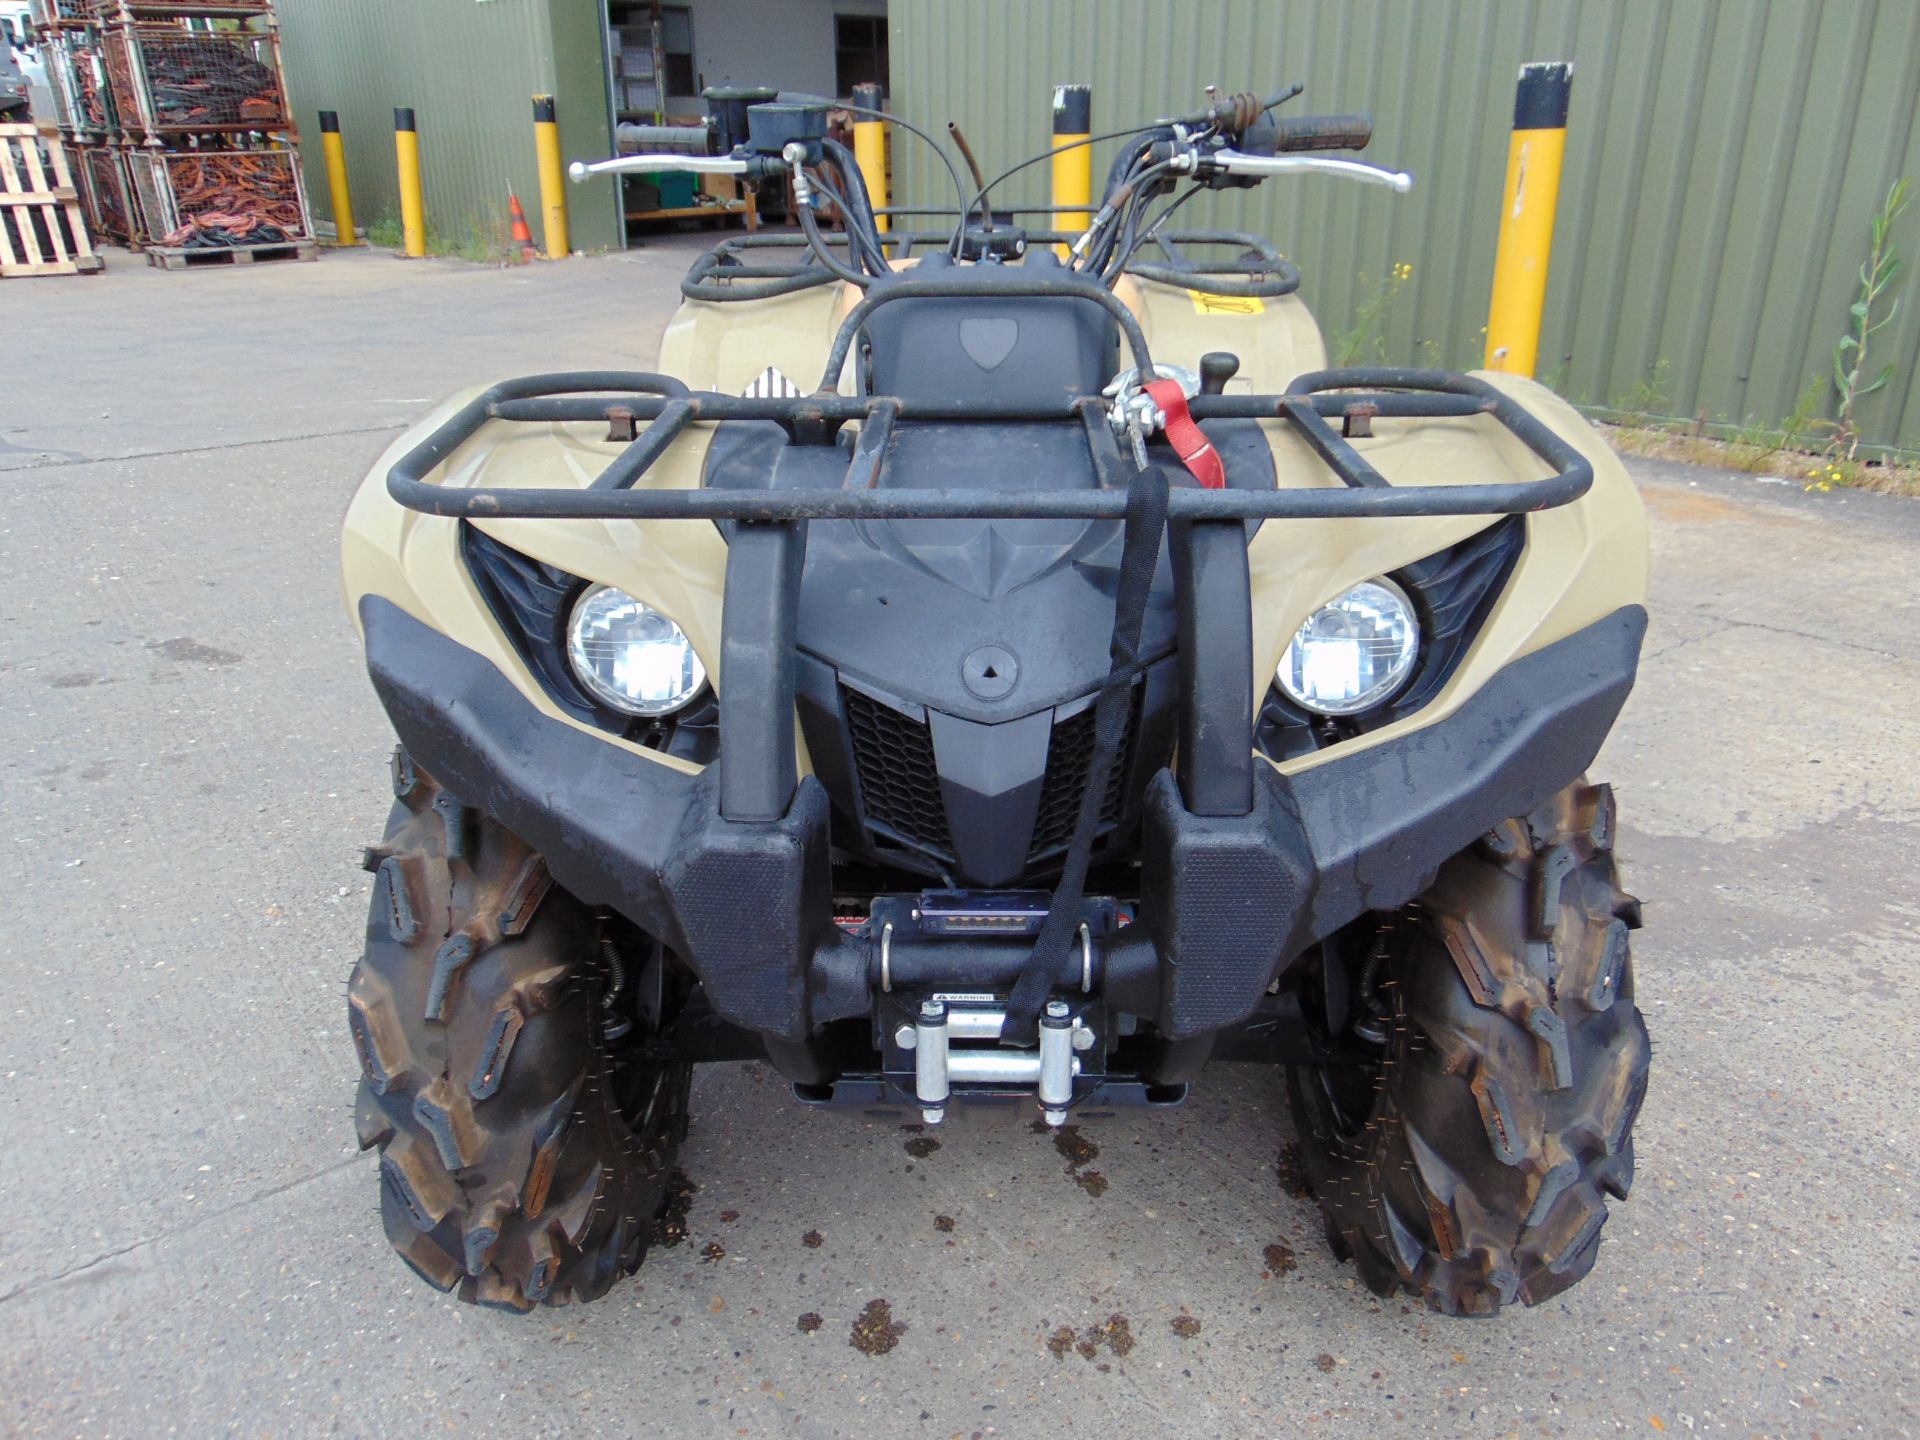 Military Specification Yamaha Grizzly 450 4 x 4 ATV Quad Bike ONLY 213 HOURS! - Image 2 of 18